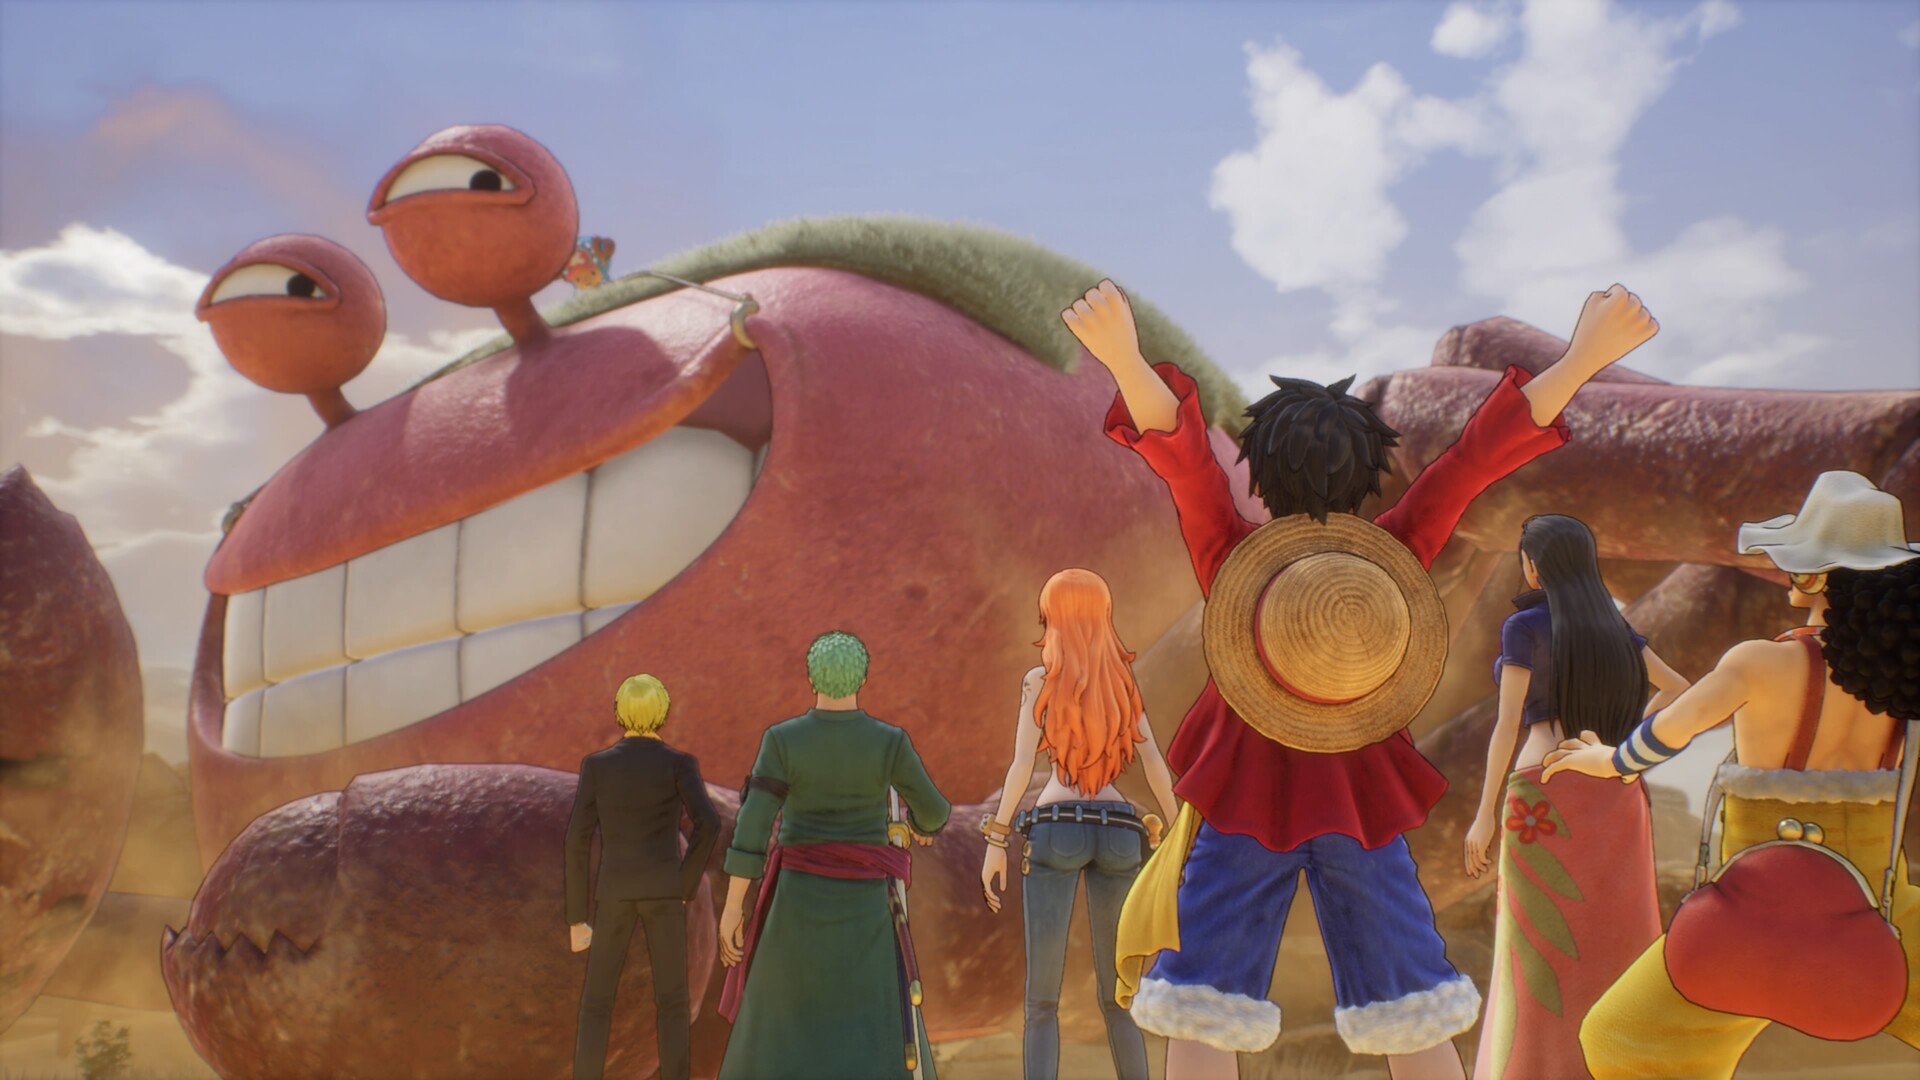 HD desktop wallpaper from One Piece Odyssey featuring the main characters facing a giant creature under a cloudy sky.